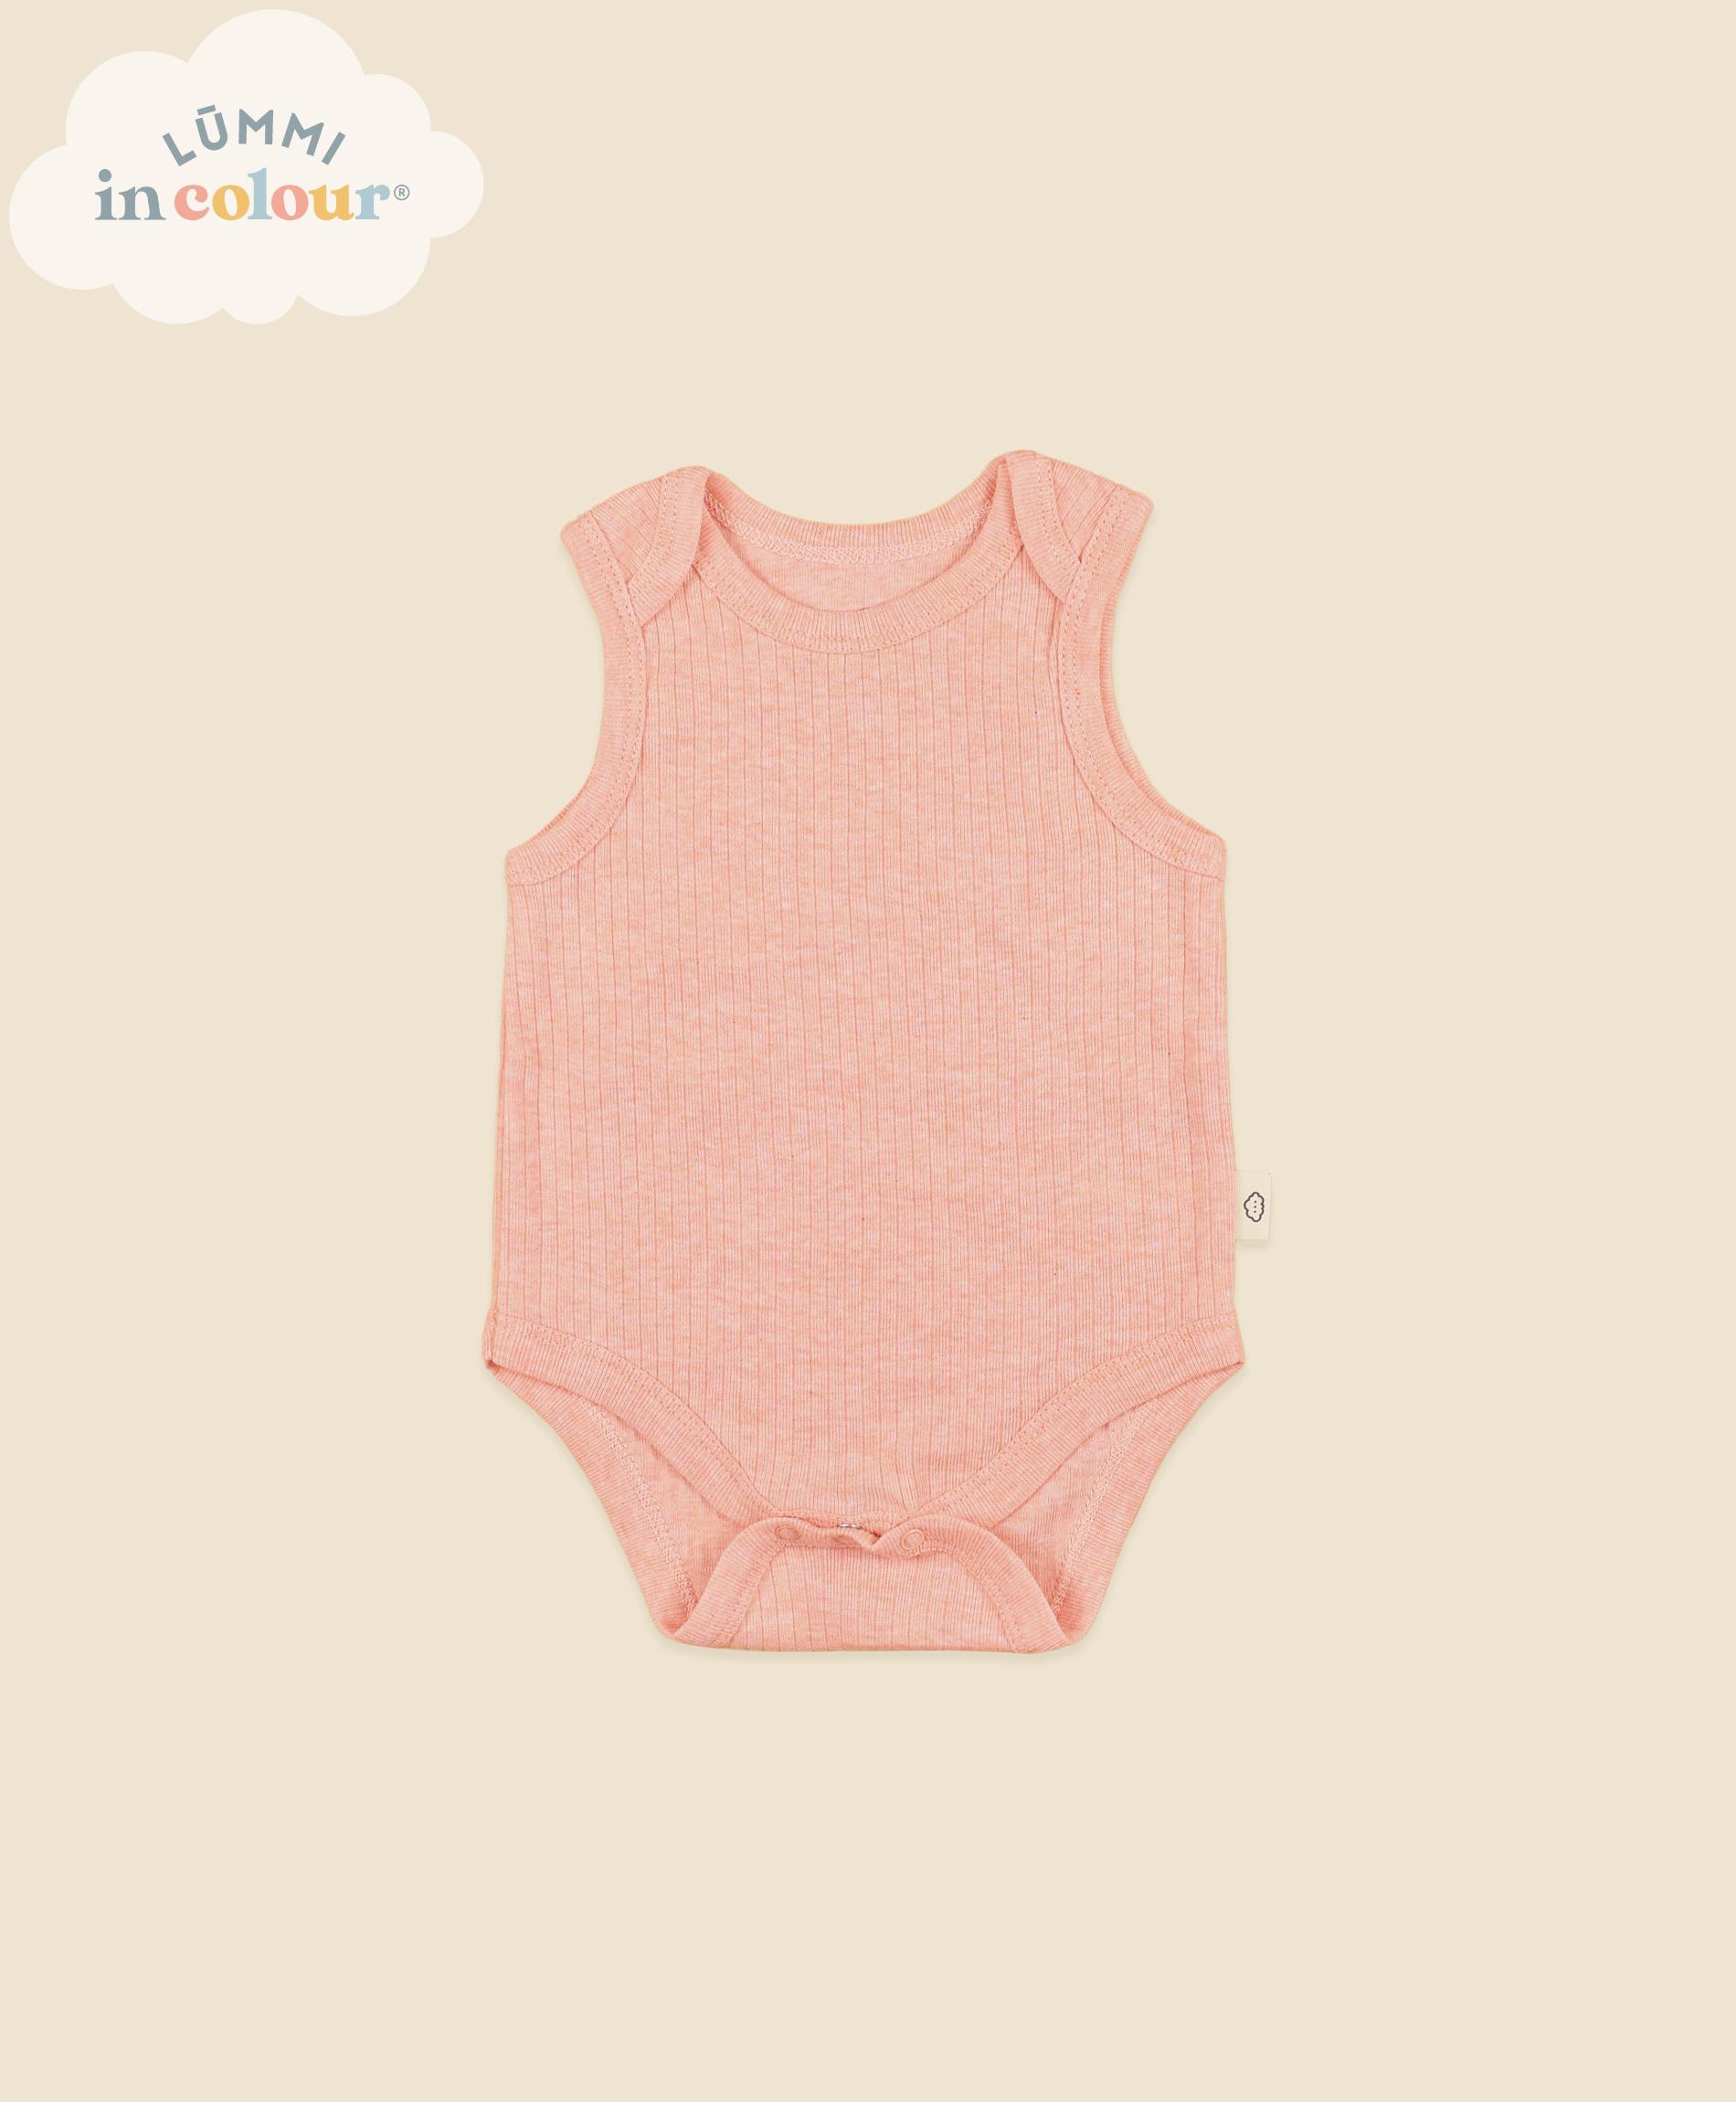 Lummi Body Suit Non-Sleeves - Neutral Pink